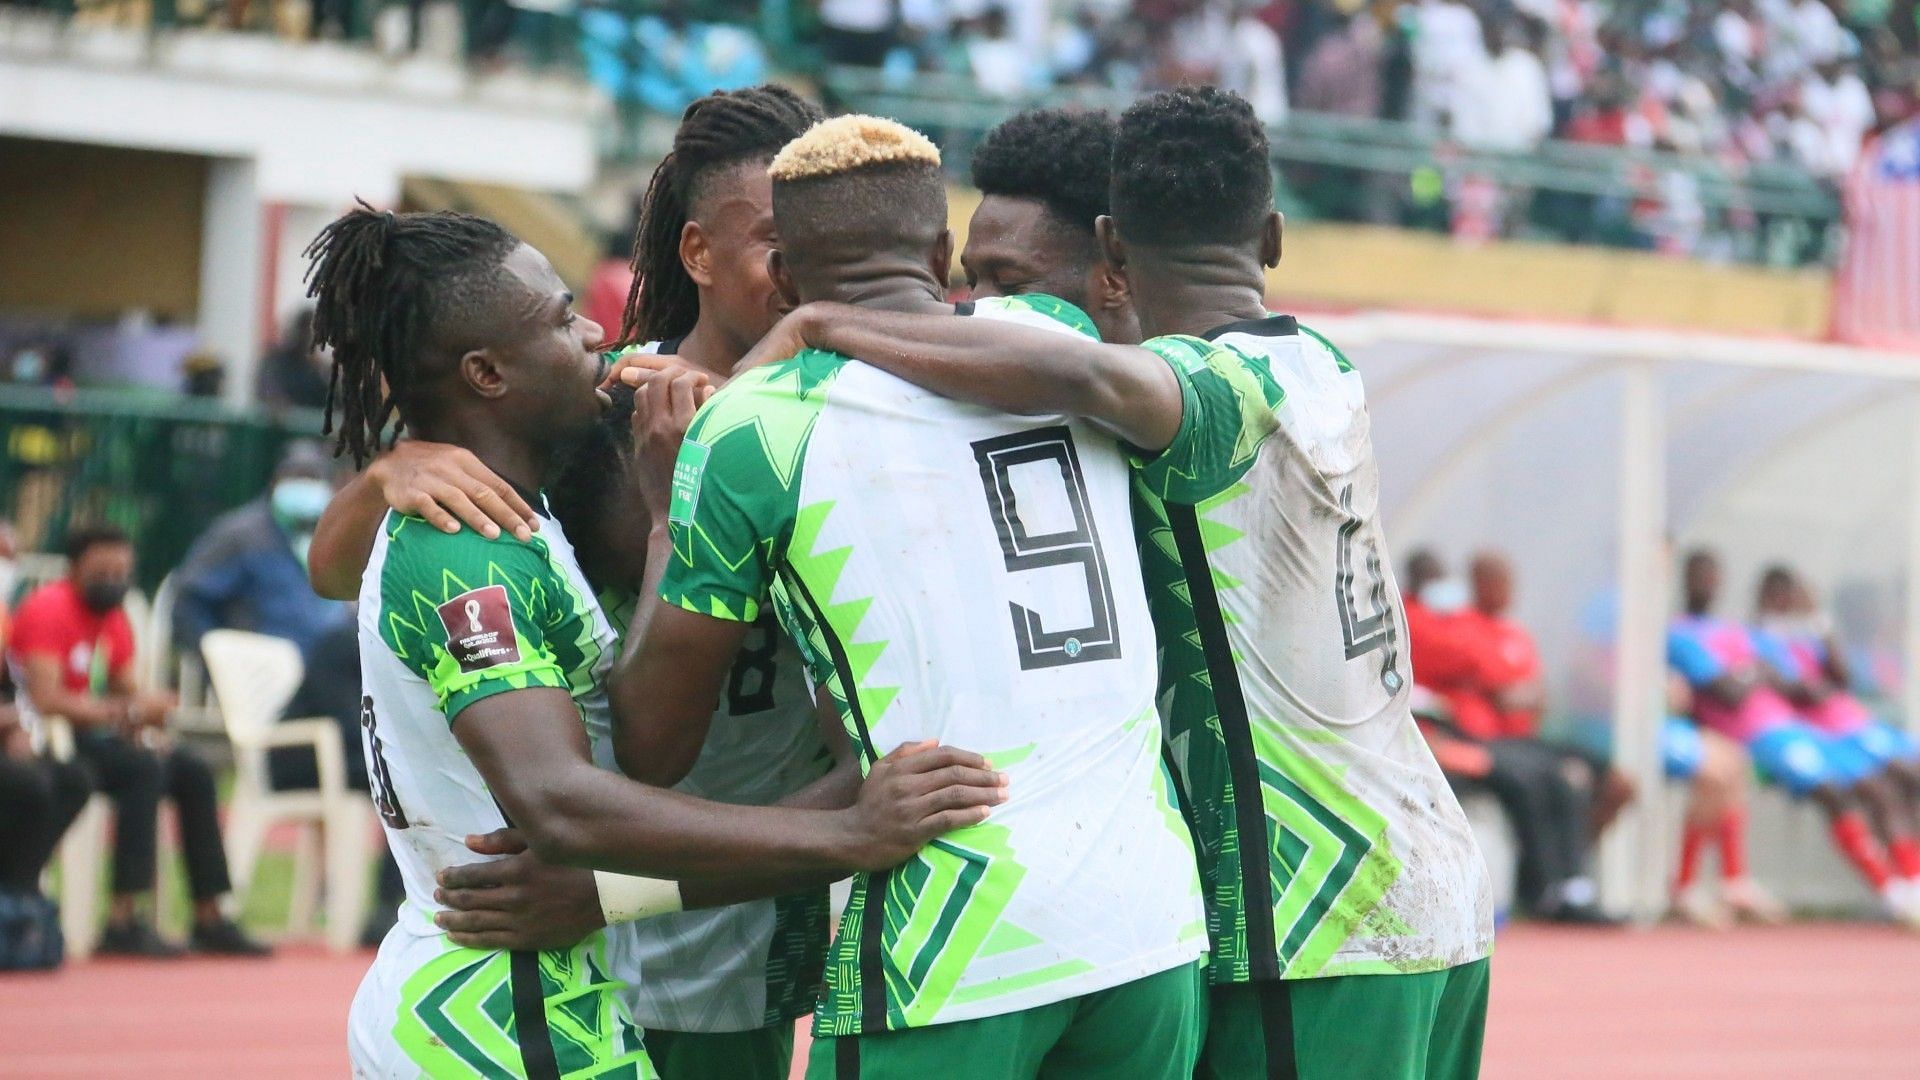 Nigeria lock horns with Egypt in their AFCON 2021 opener on Tuesday